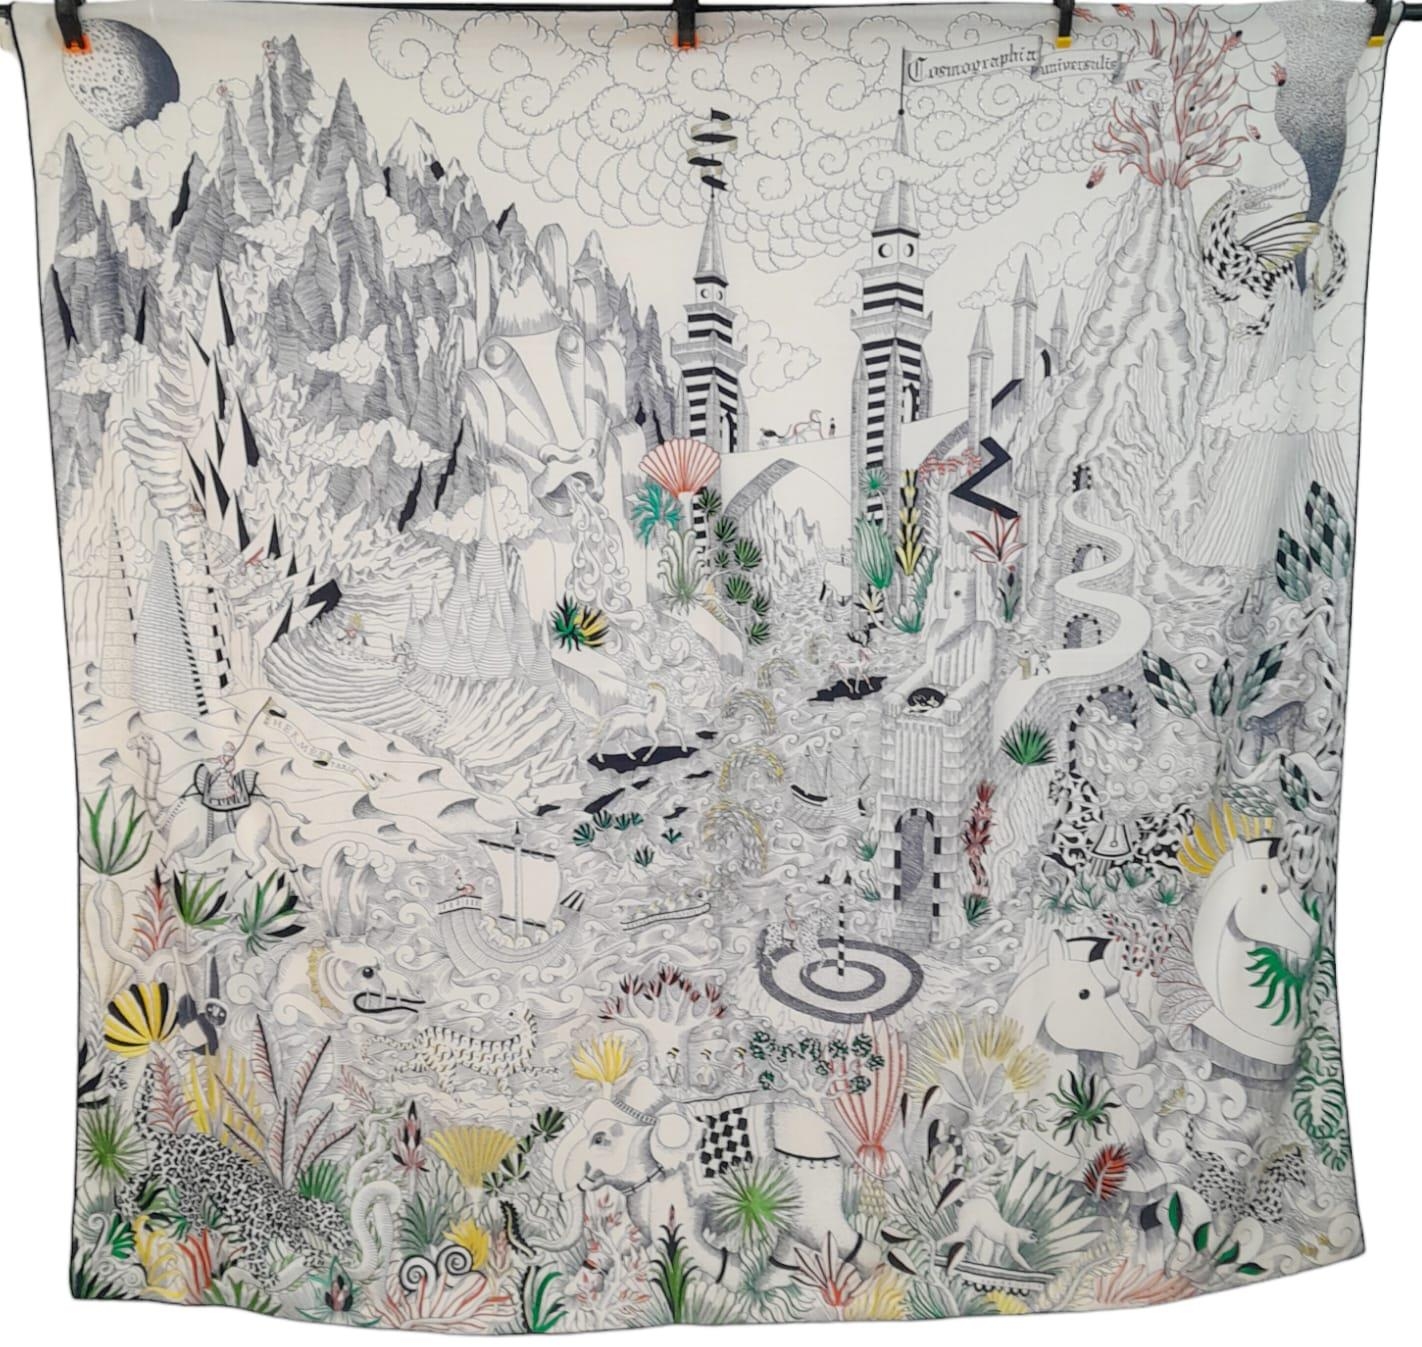 An Hermes Cosmographia Shawl/Scarf. Cashmere with embroidery and beaded details. New with tags.